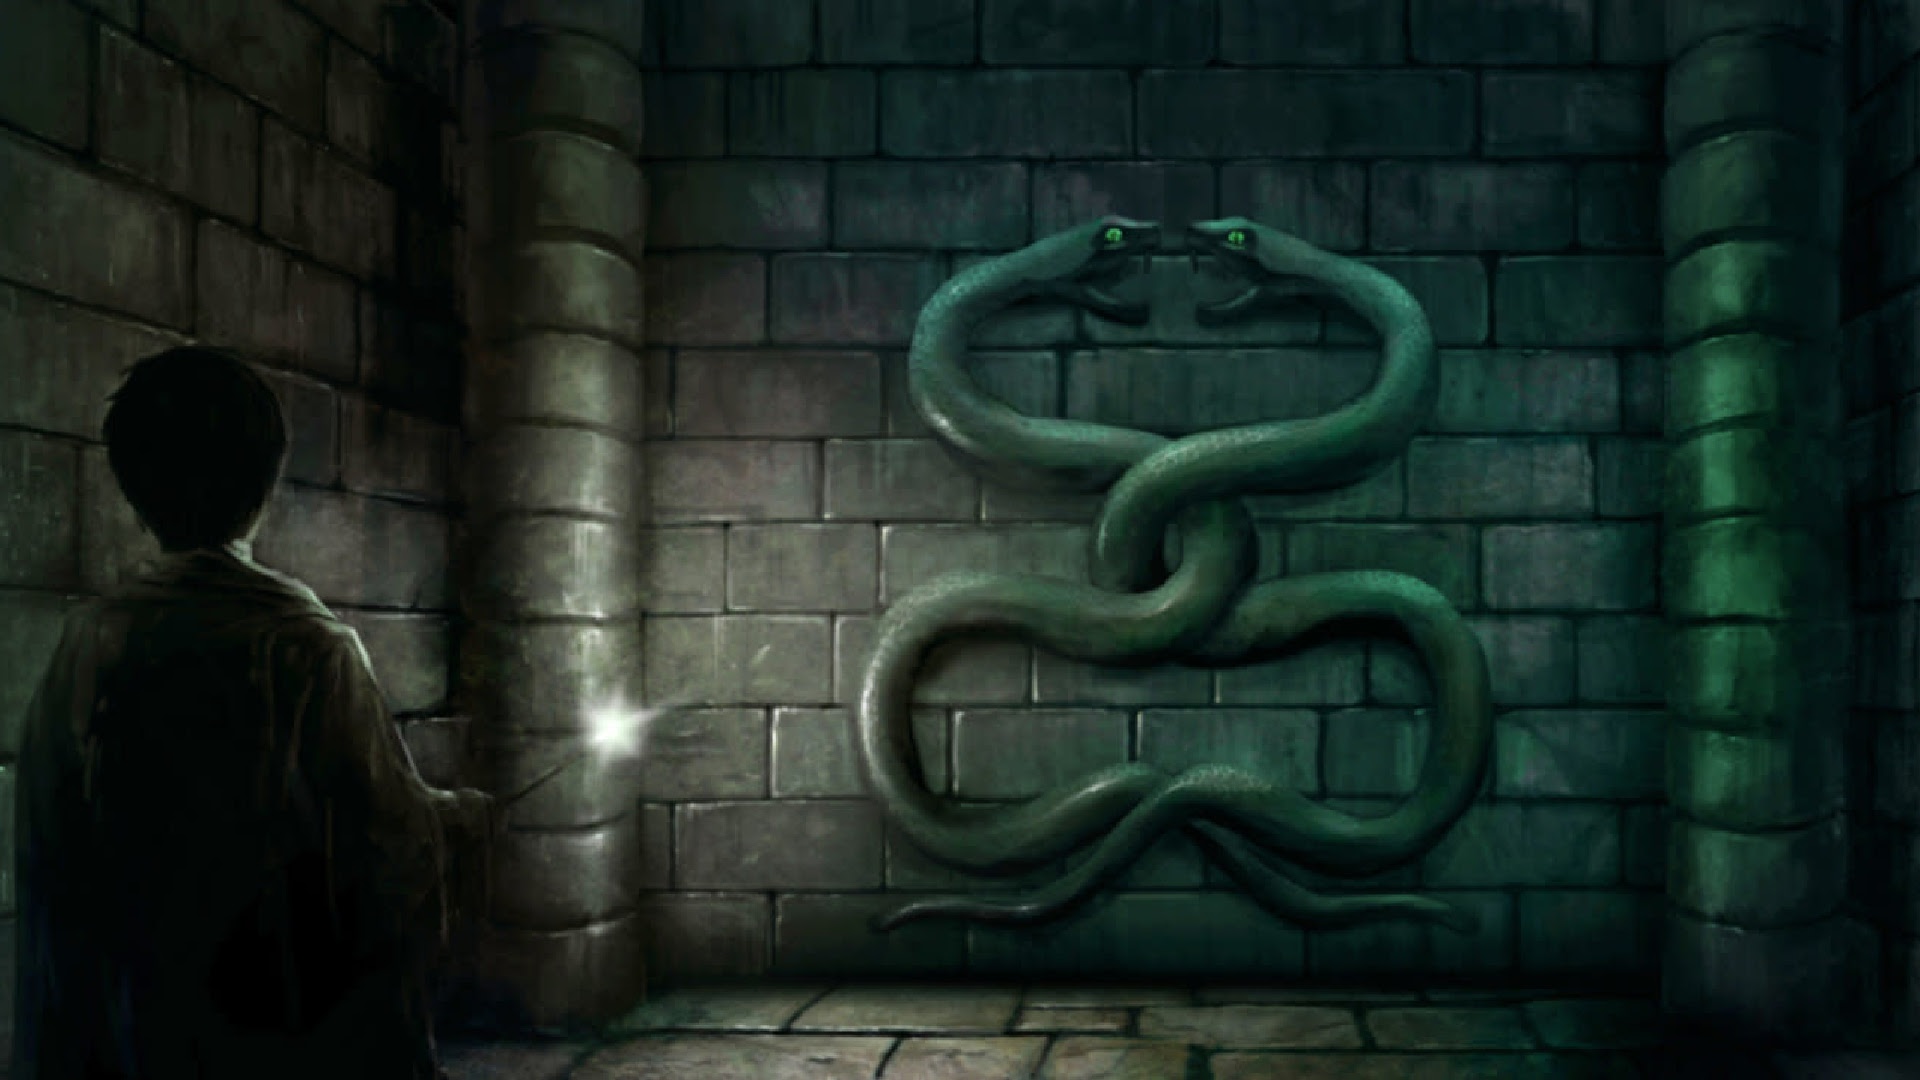 Harry Potter and the Chamber of Secrets instal the last version for mac